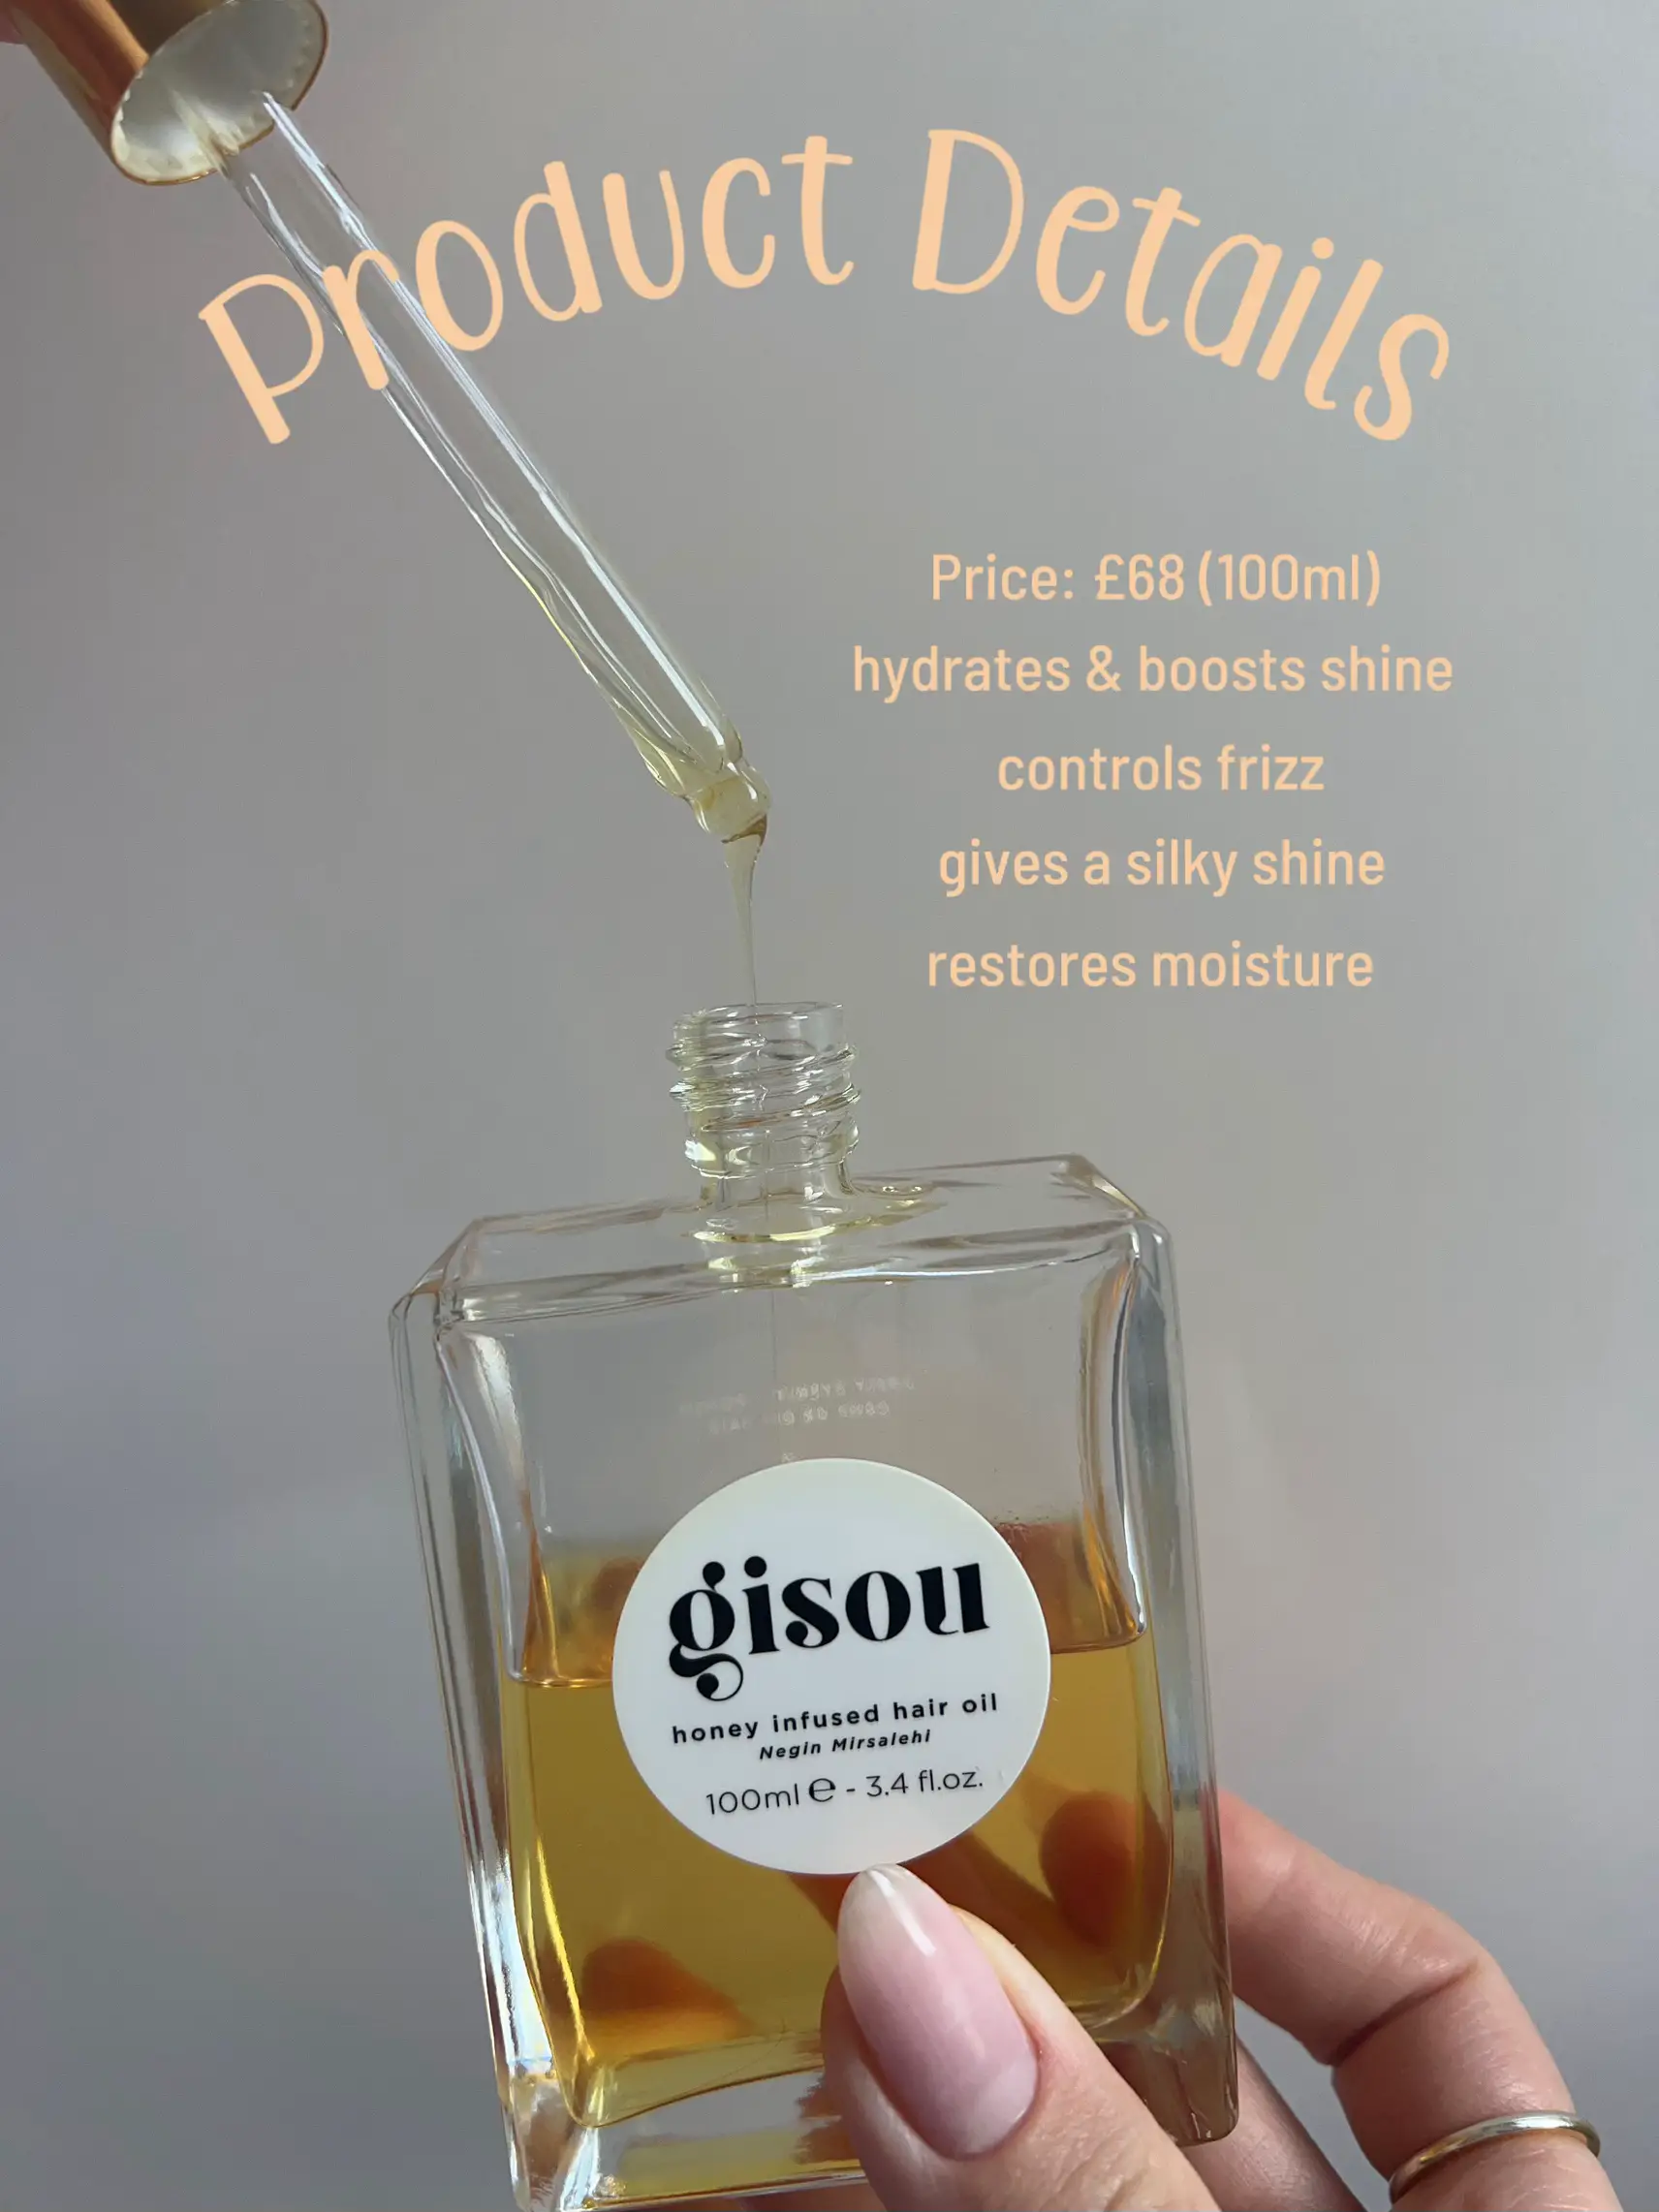 Honey-Scented Hair Fragrance for a Silky Shine – Gisou